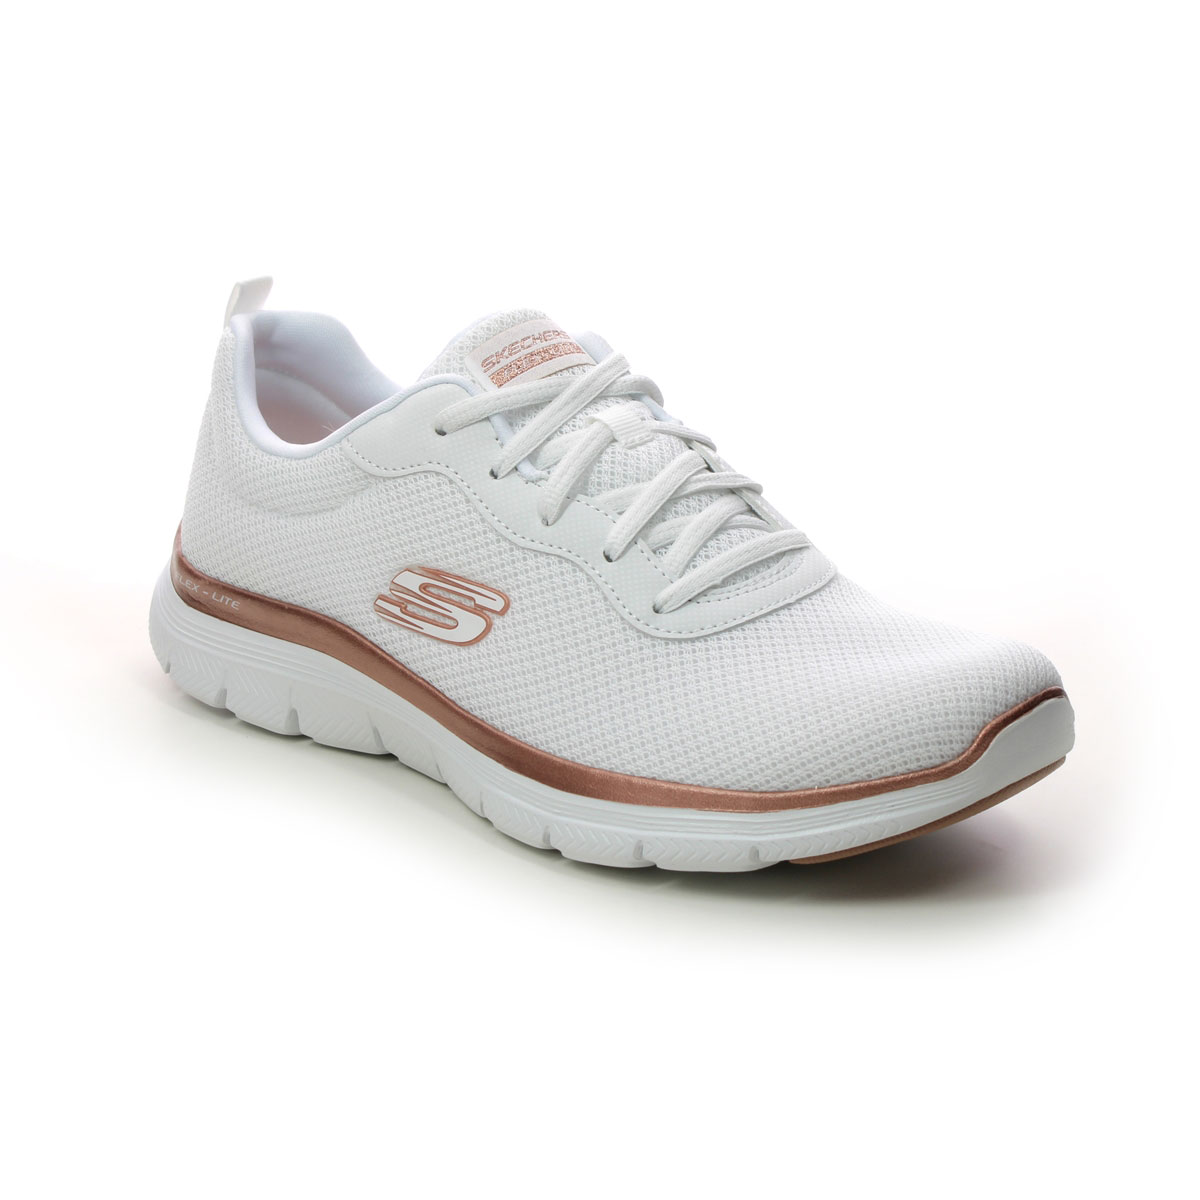 Skechers Flex Appeal 4.0 White Rose Gold Womens Trainers 149303 In Size 9 In Plain White Rose Gold